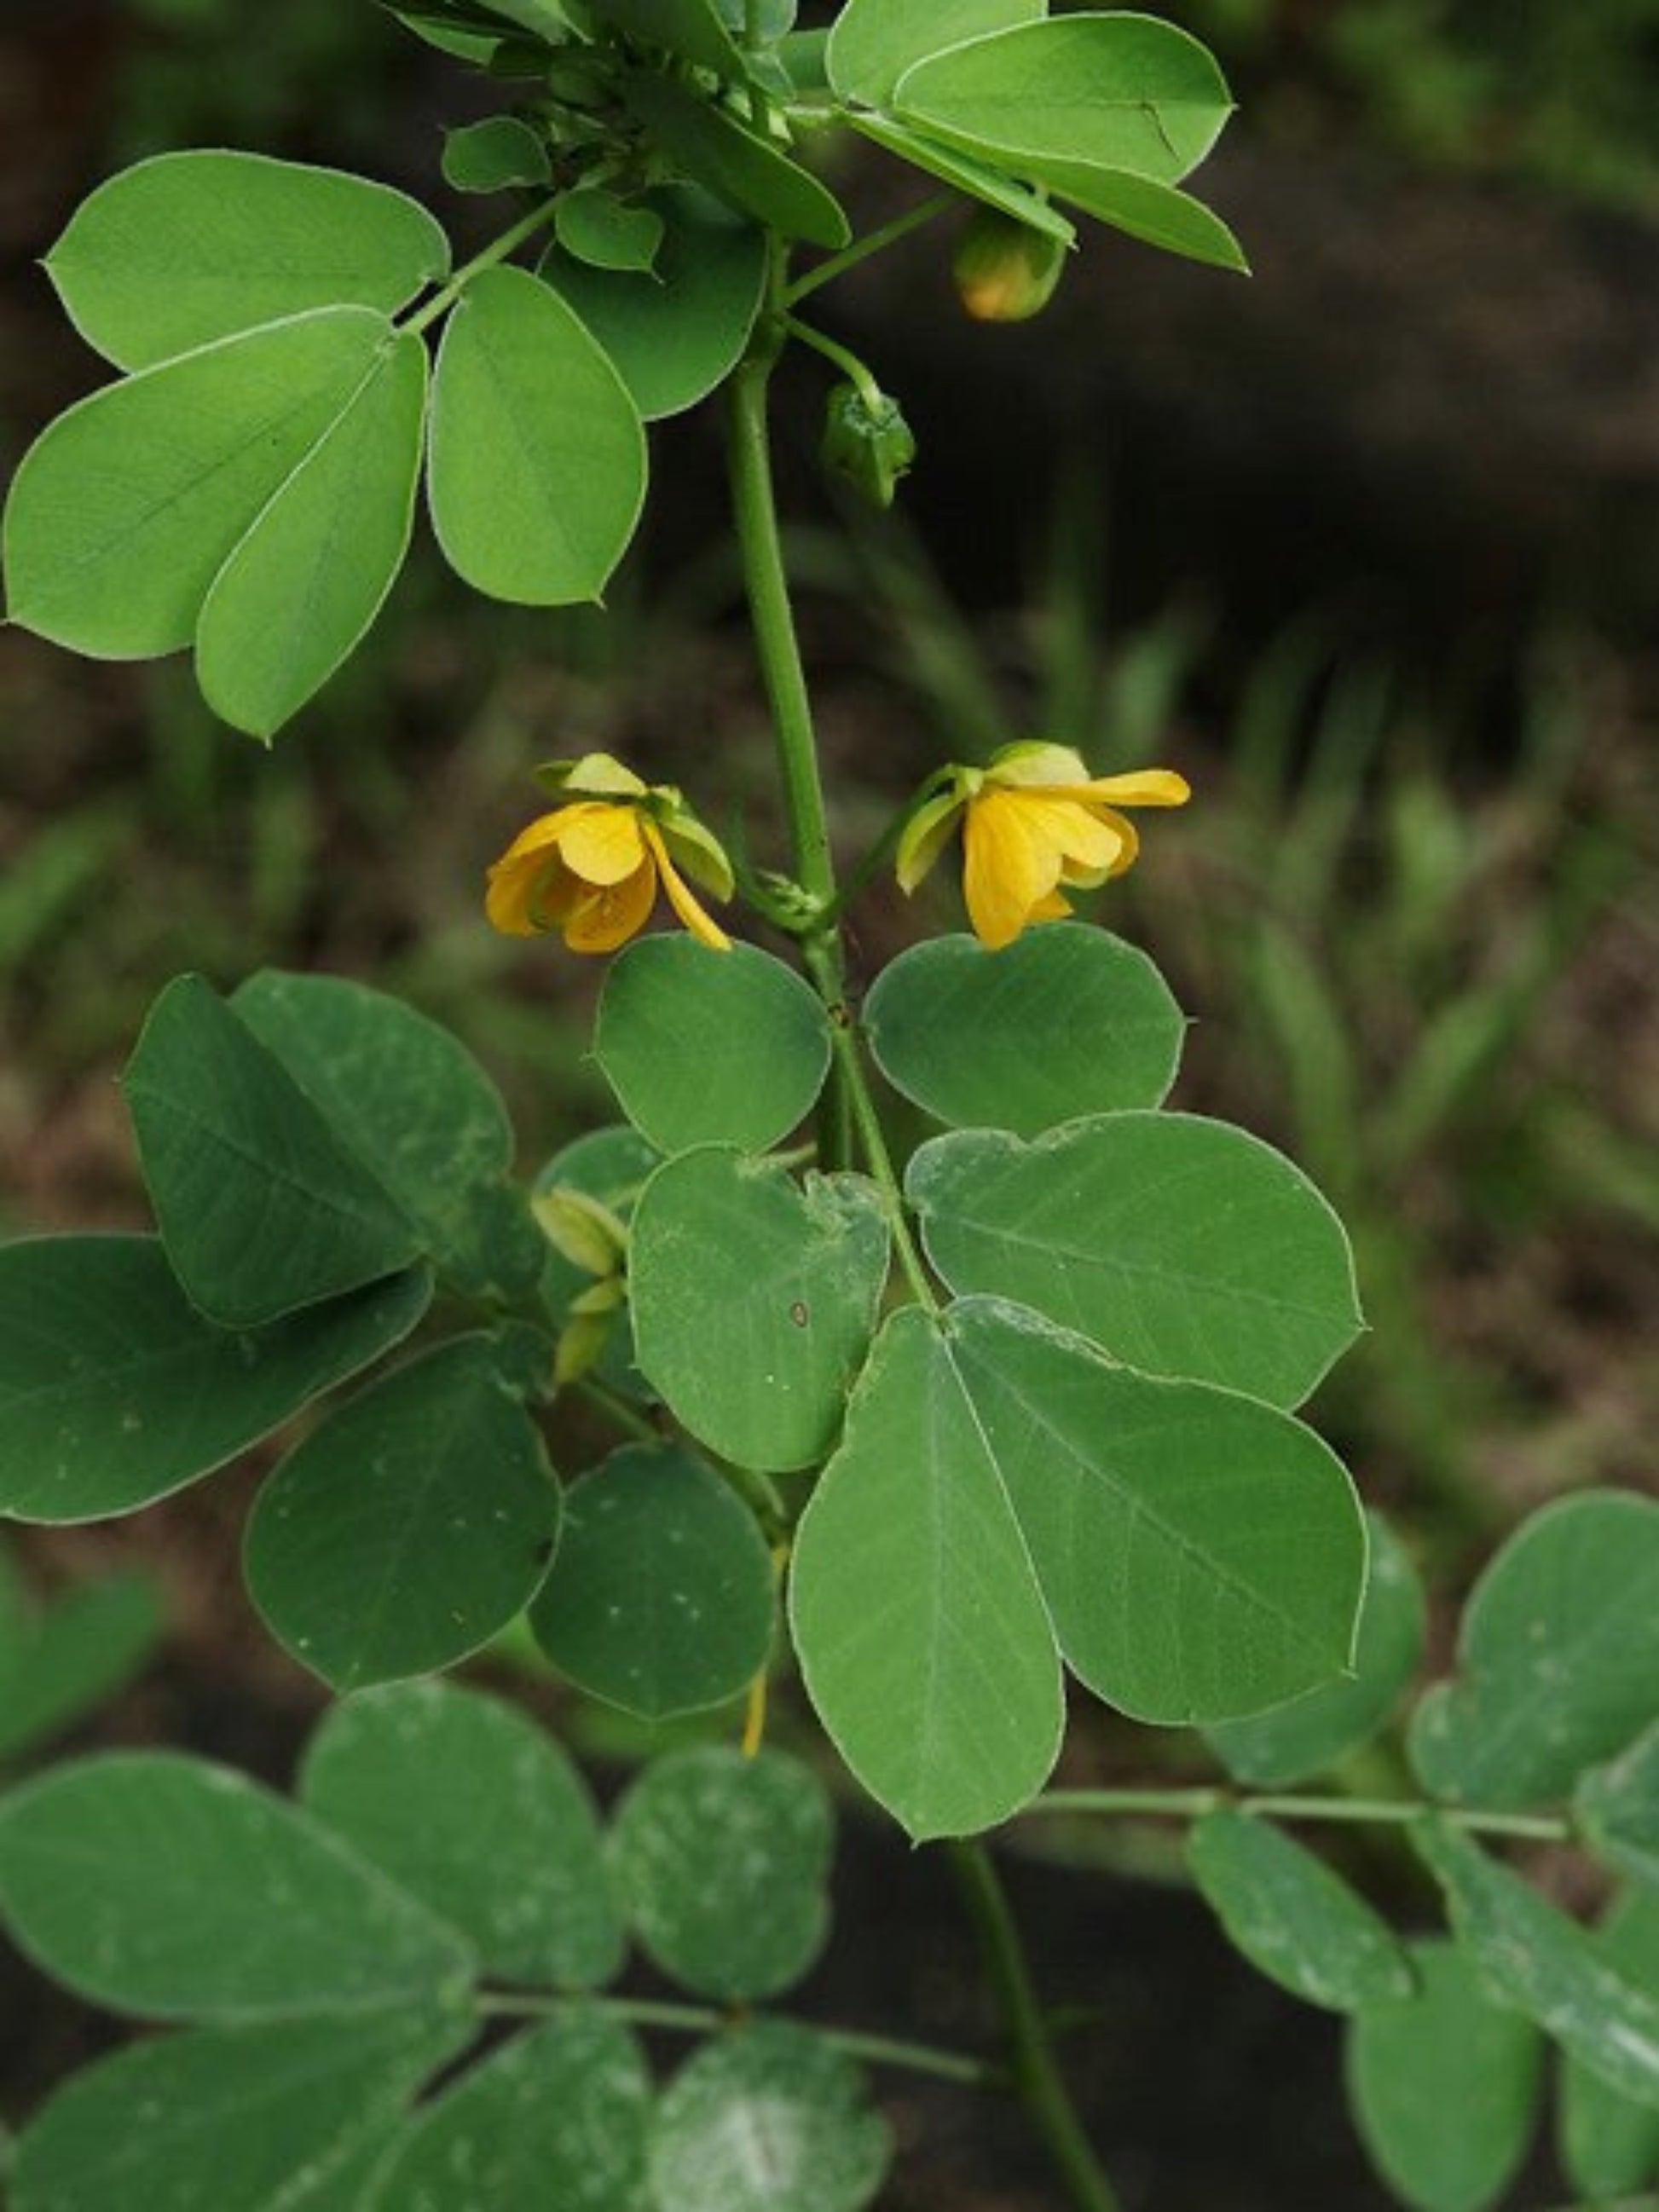 Senna obtusifolia " sickle pod" is the host plant for sulphur butterfly